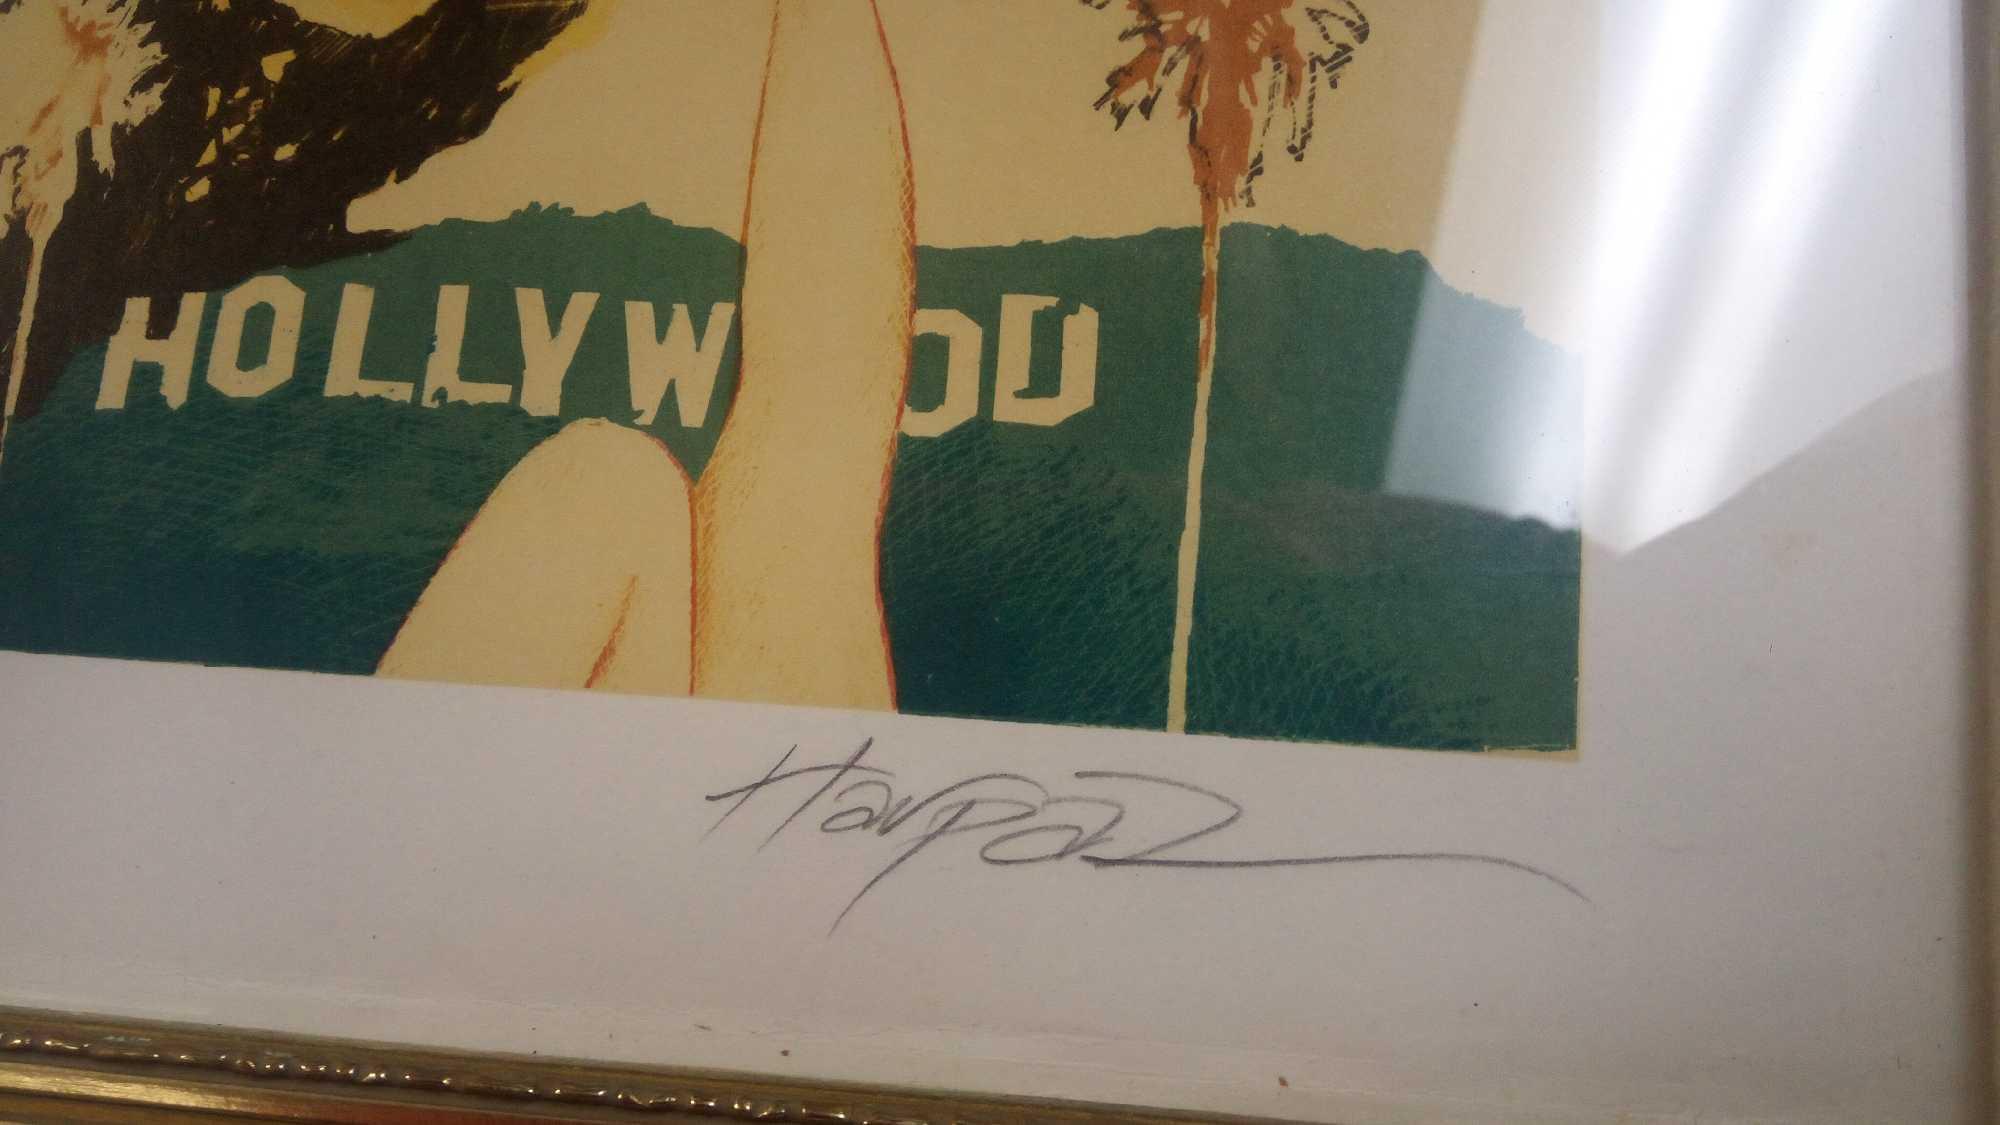 ARI HARPAZ "HOLLYWOOD II" LITHOGRAPH, SIGNED, ARTIST PROOF WITH INSCRIPTION